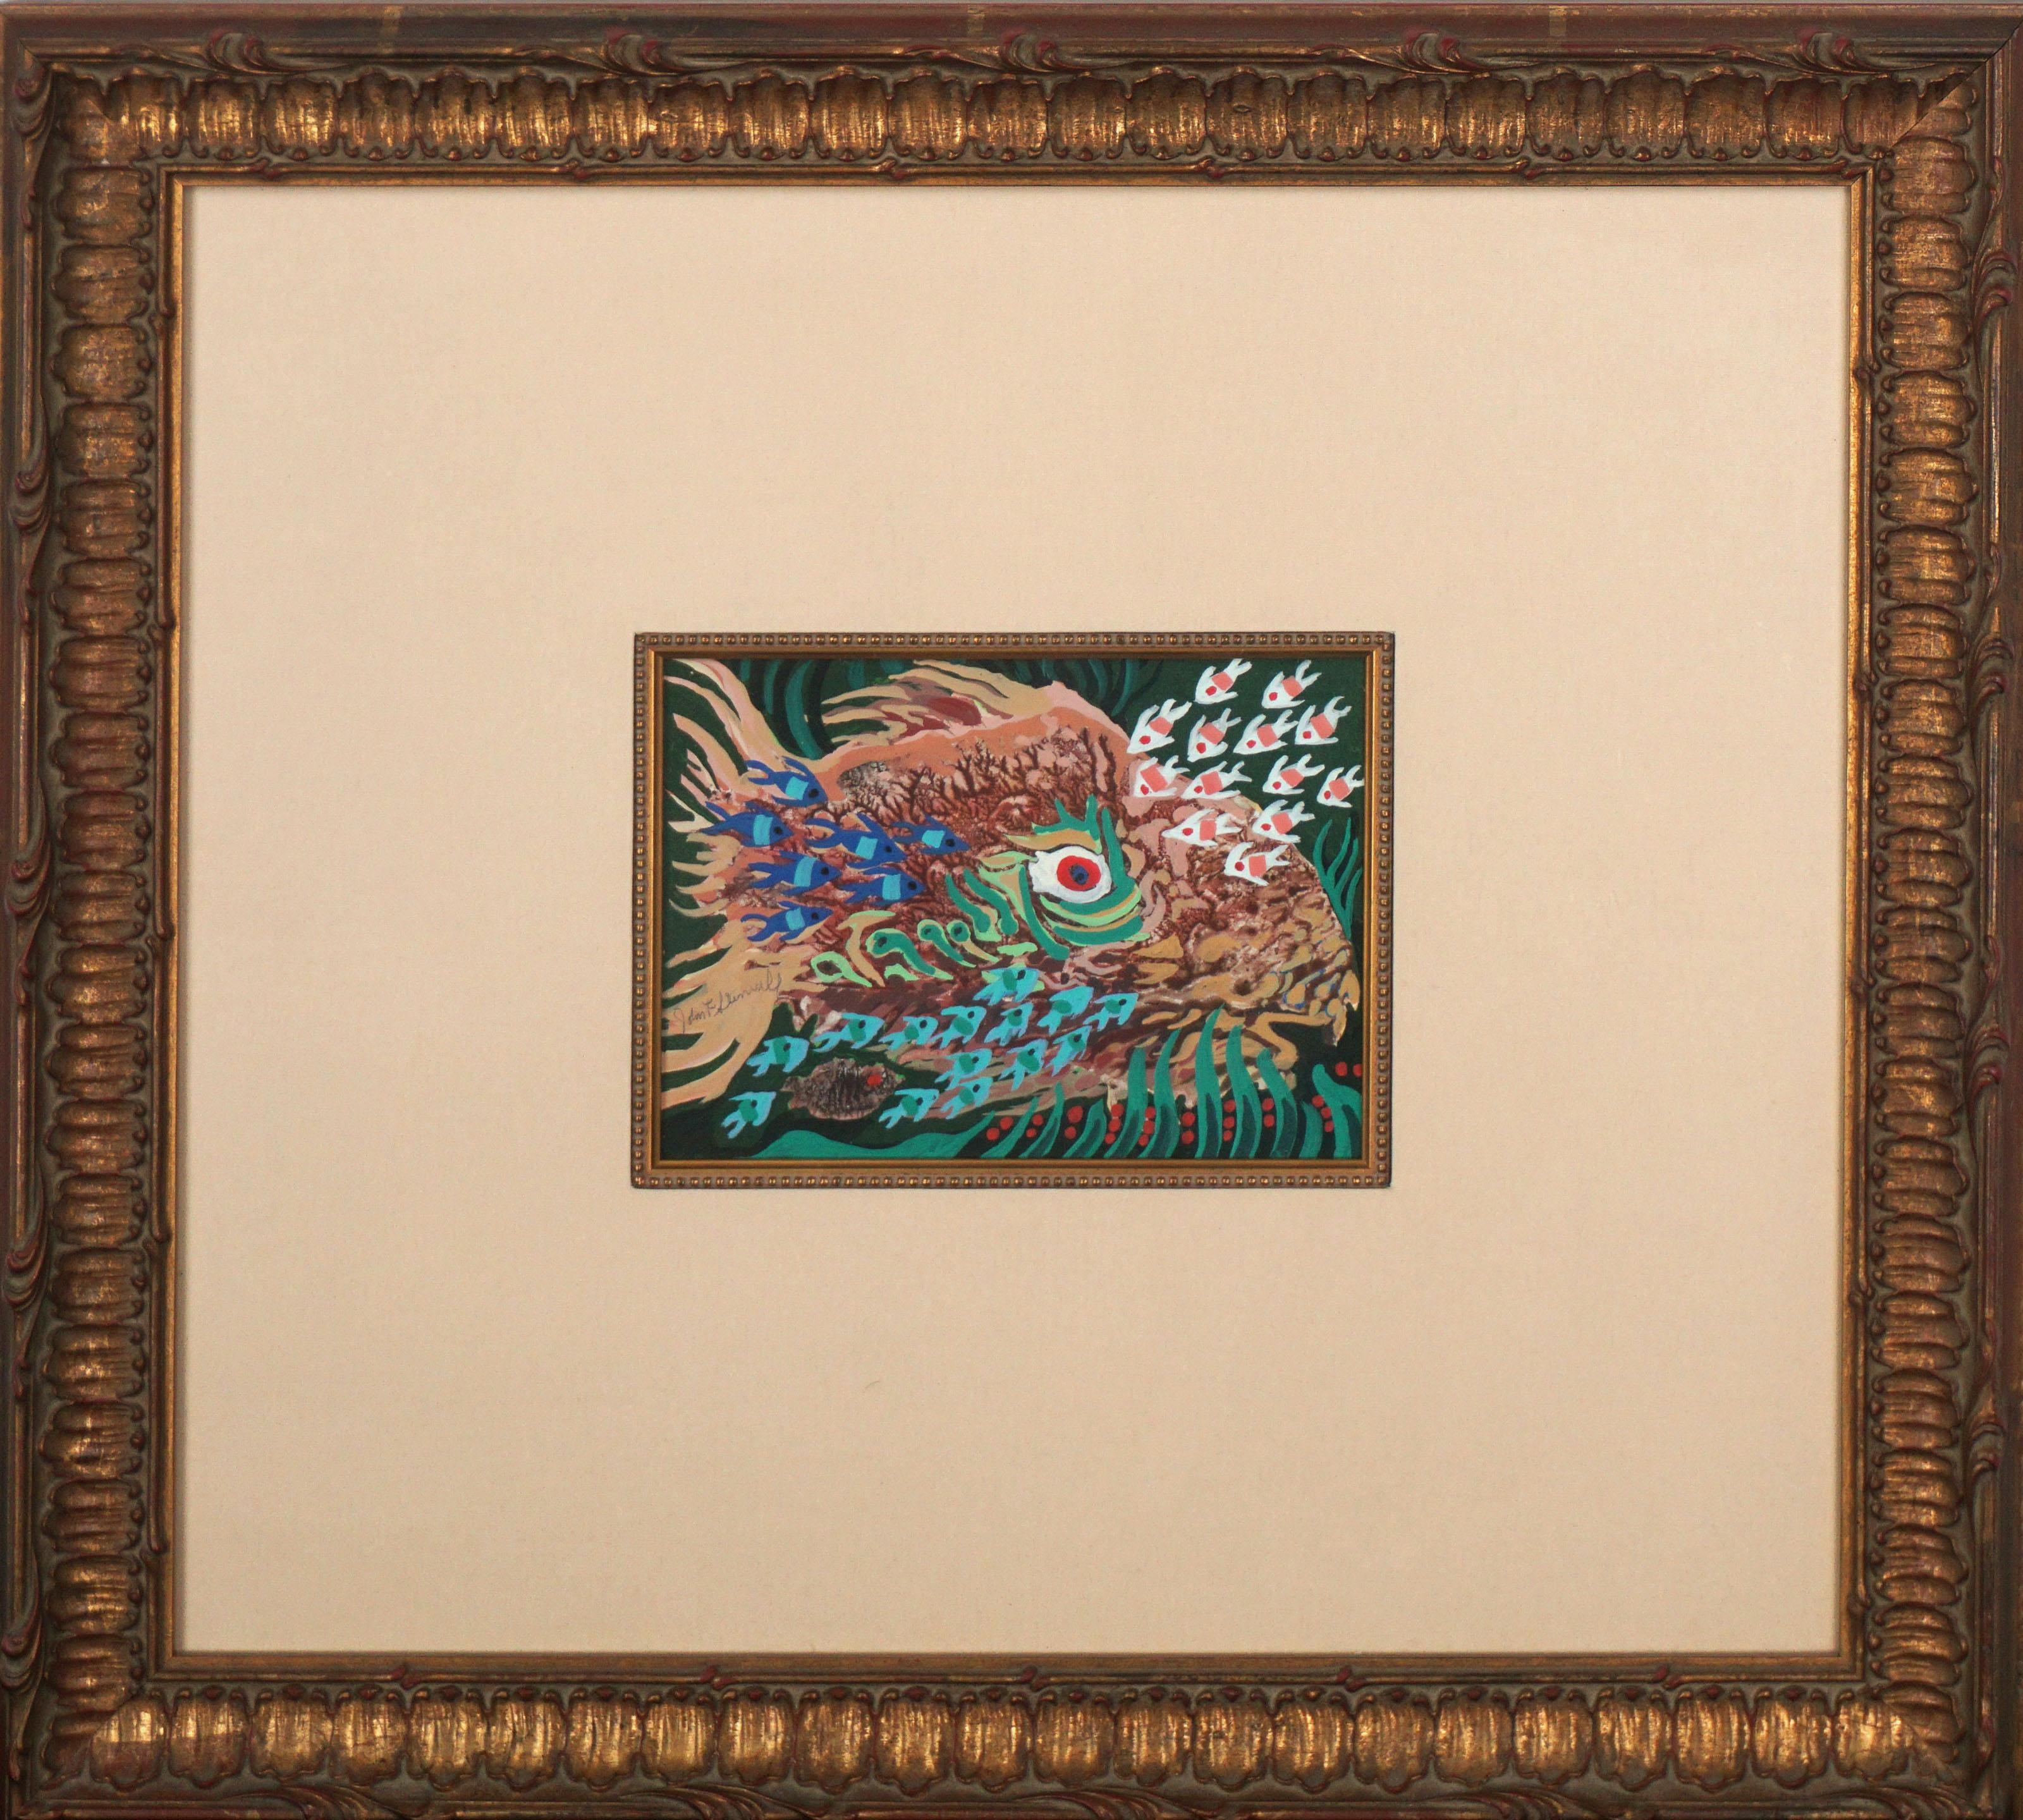 Small Scale Abstracted Figurative -- Big Fish, Little Fish Coral Reef - Painting by John Francis Stenvall